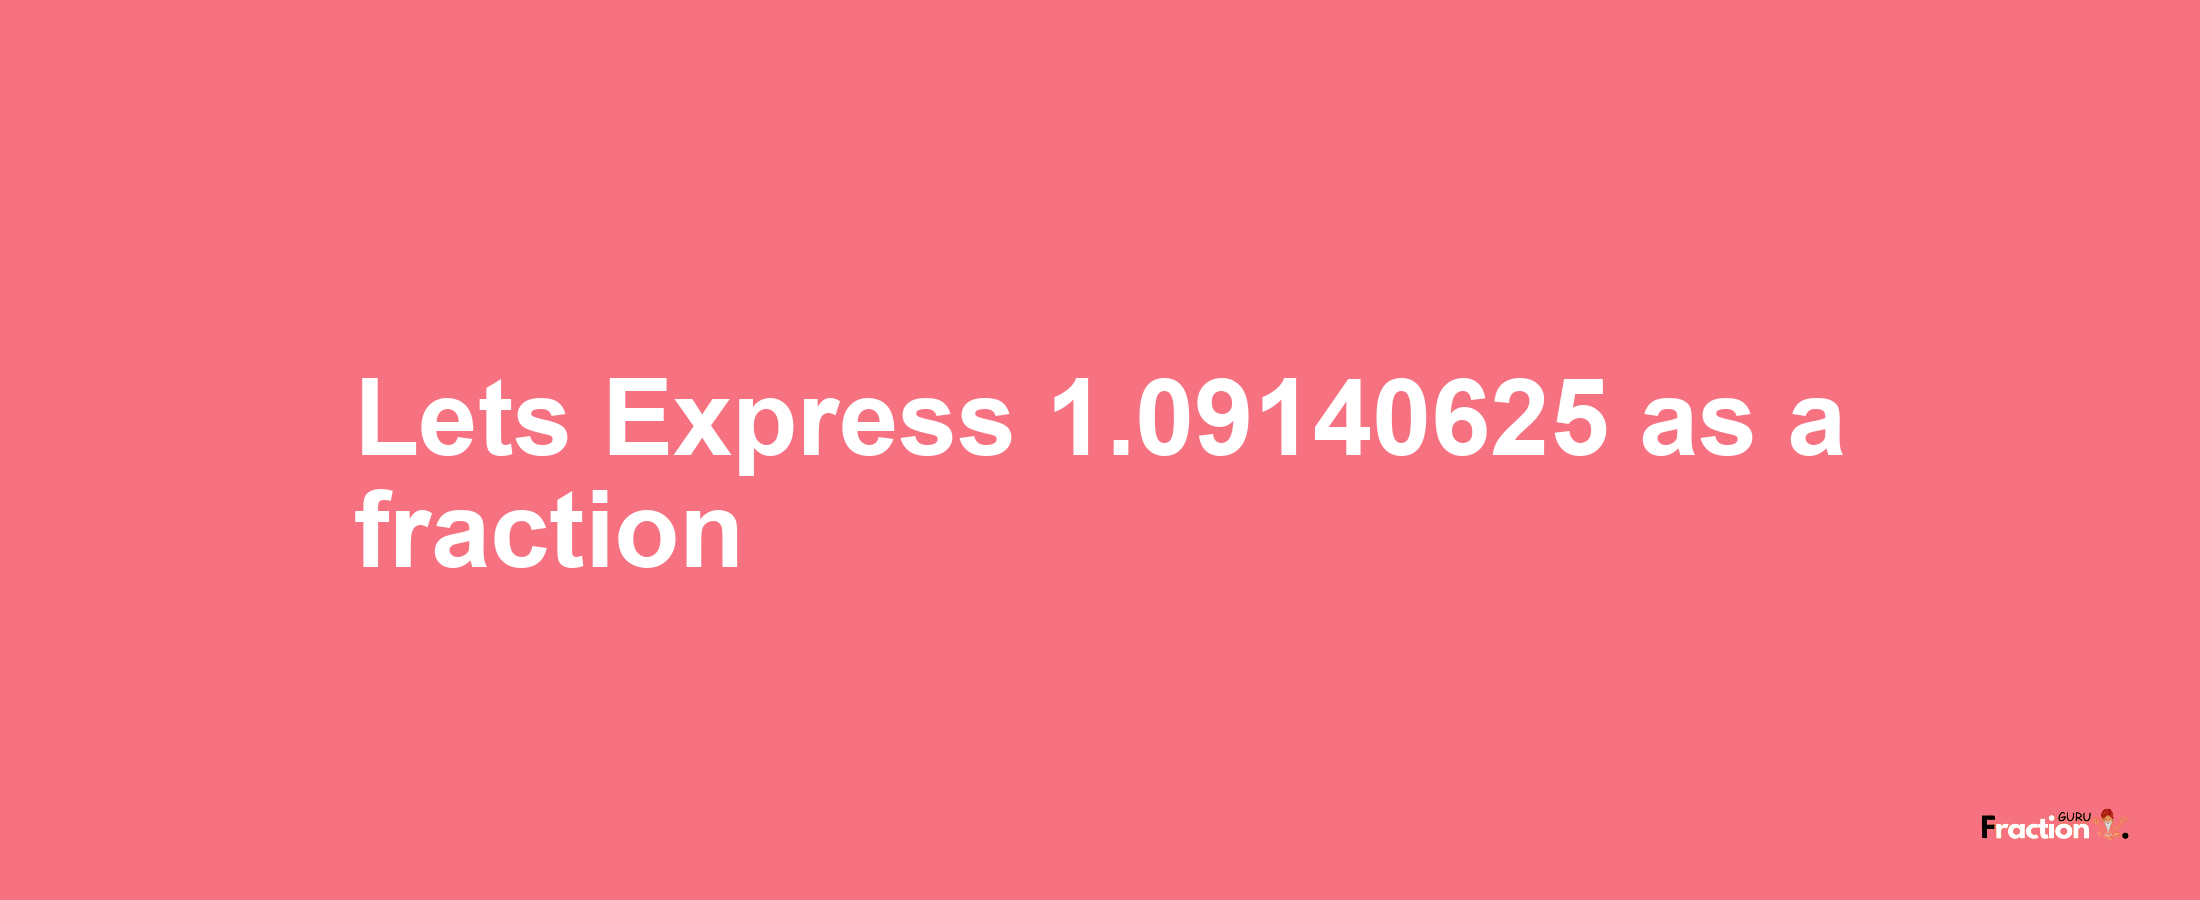 Lets Express 1.09140625 as afraction